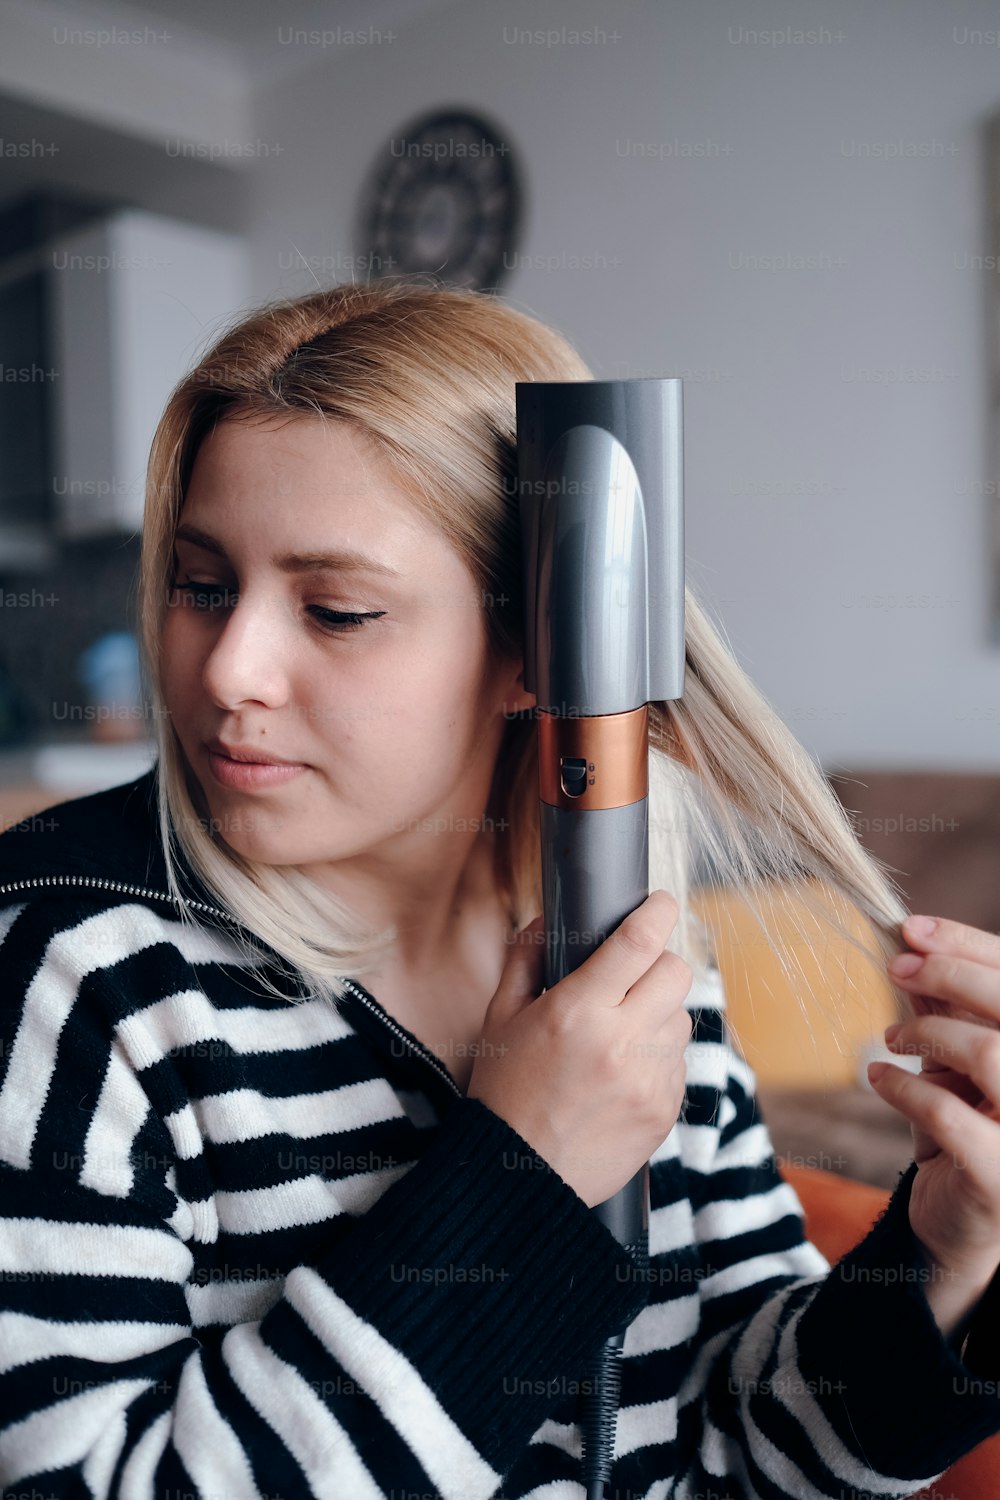 a woman blow drying her hair with a hair dryer